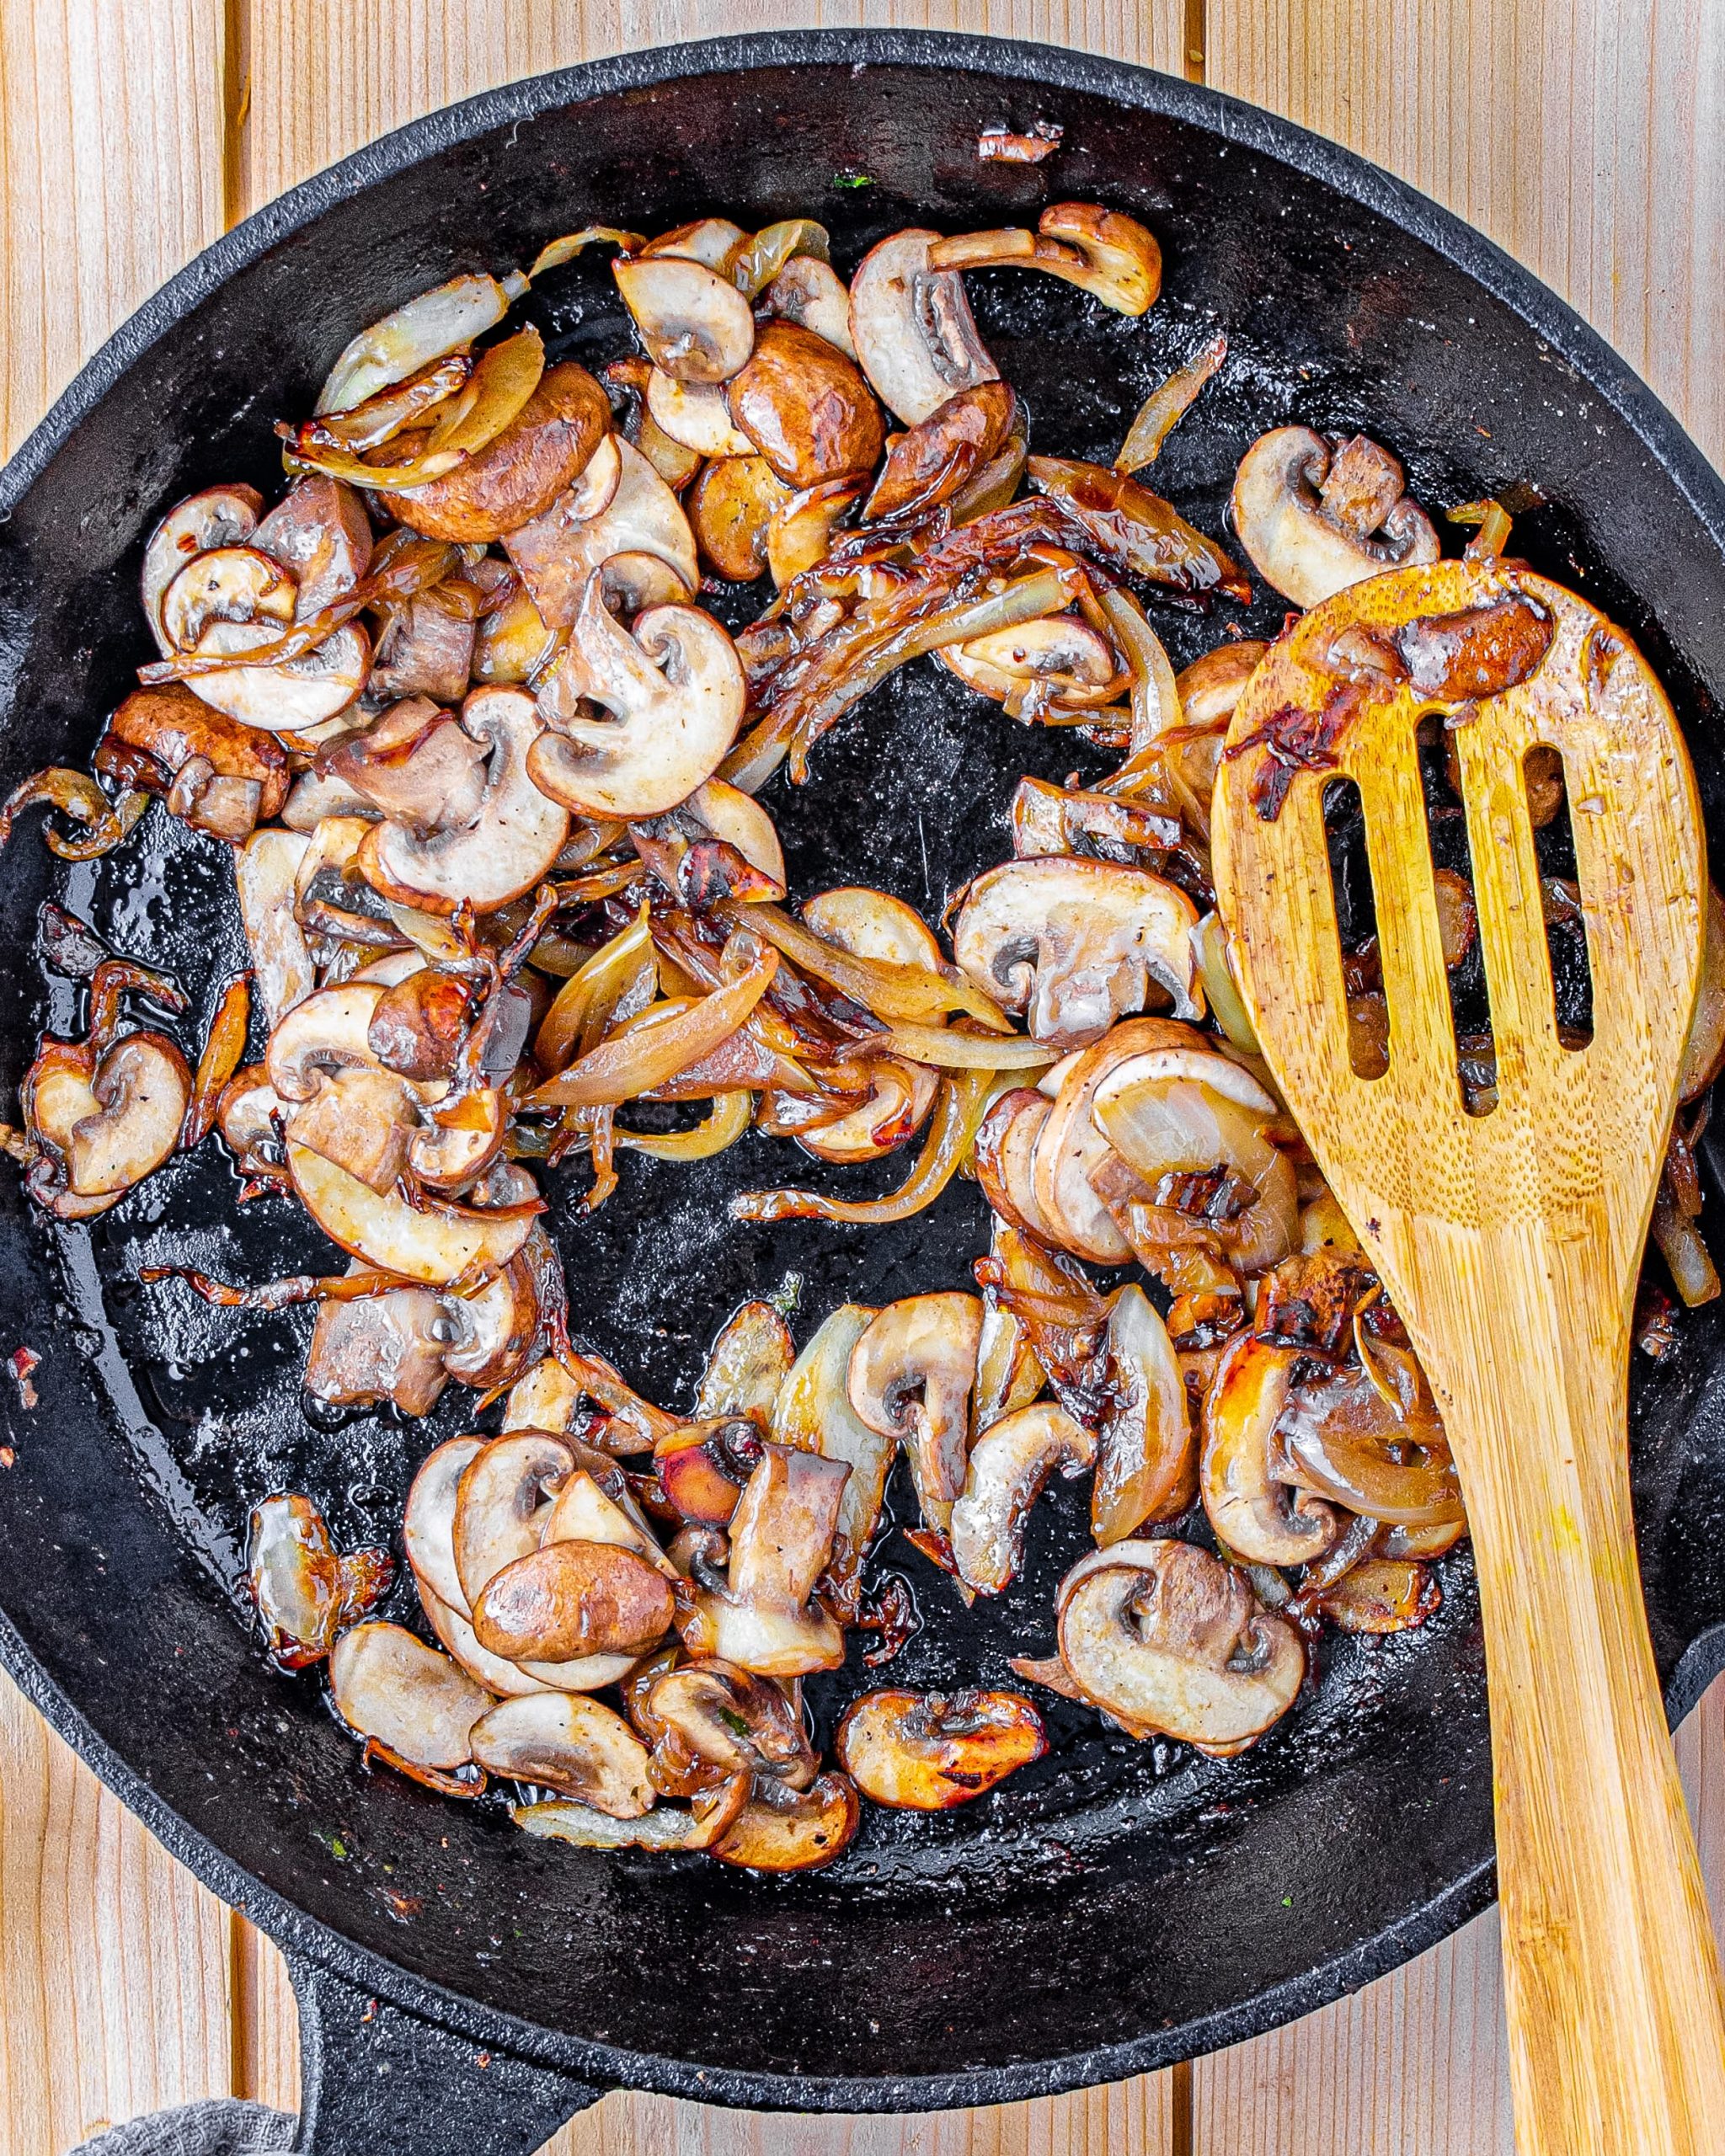 Stir the mushrooms into the skillet, and cook until tender. 